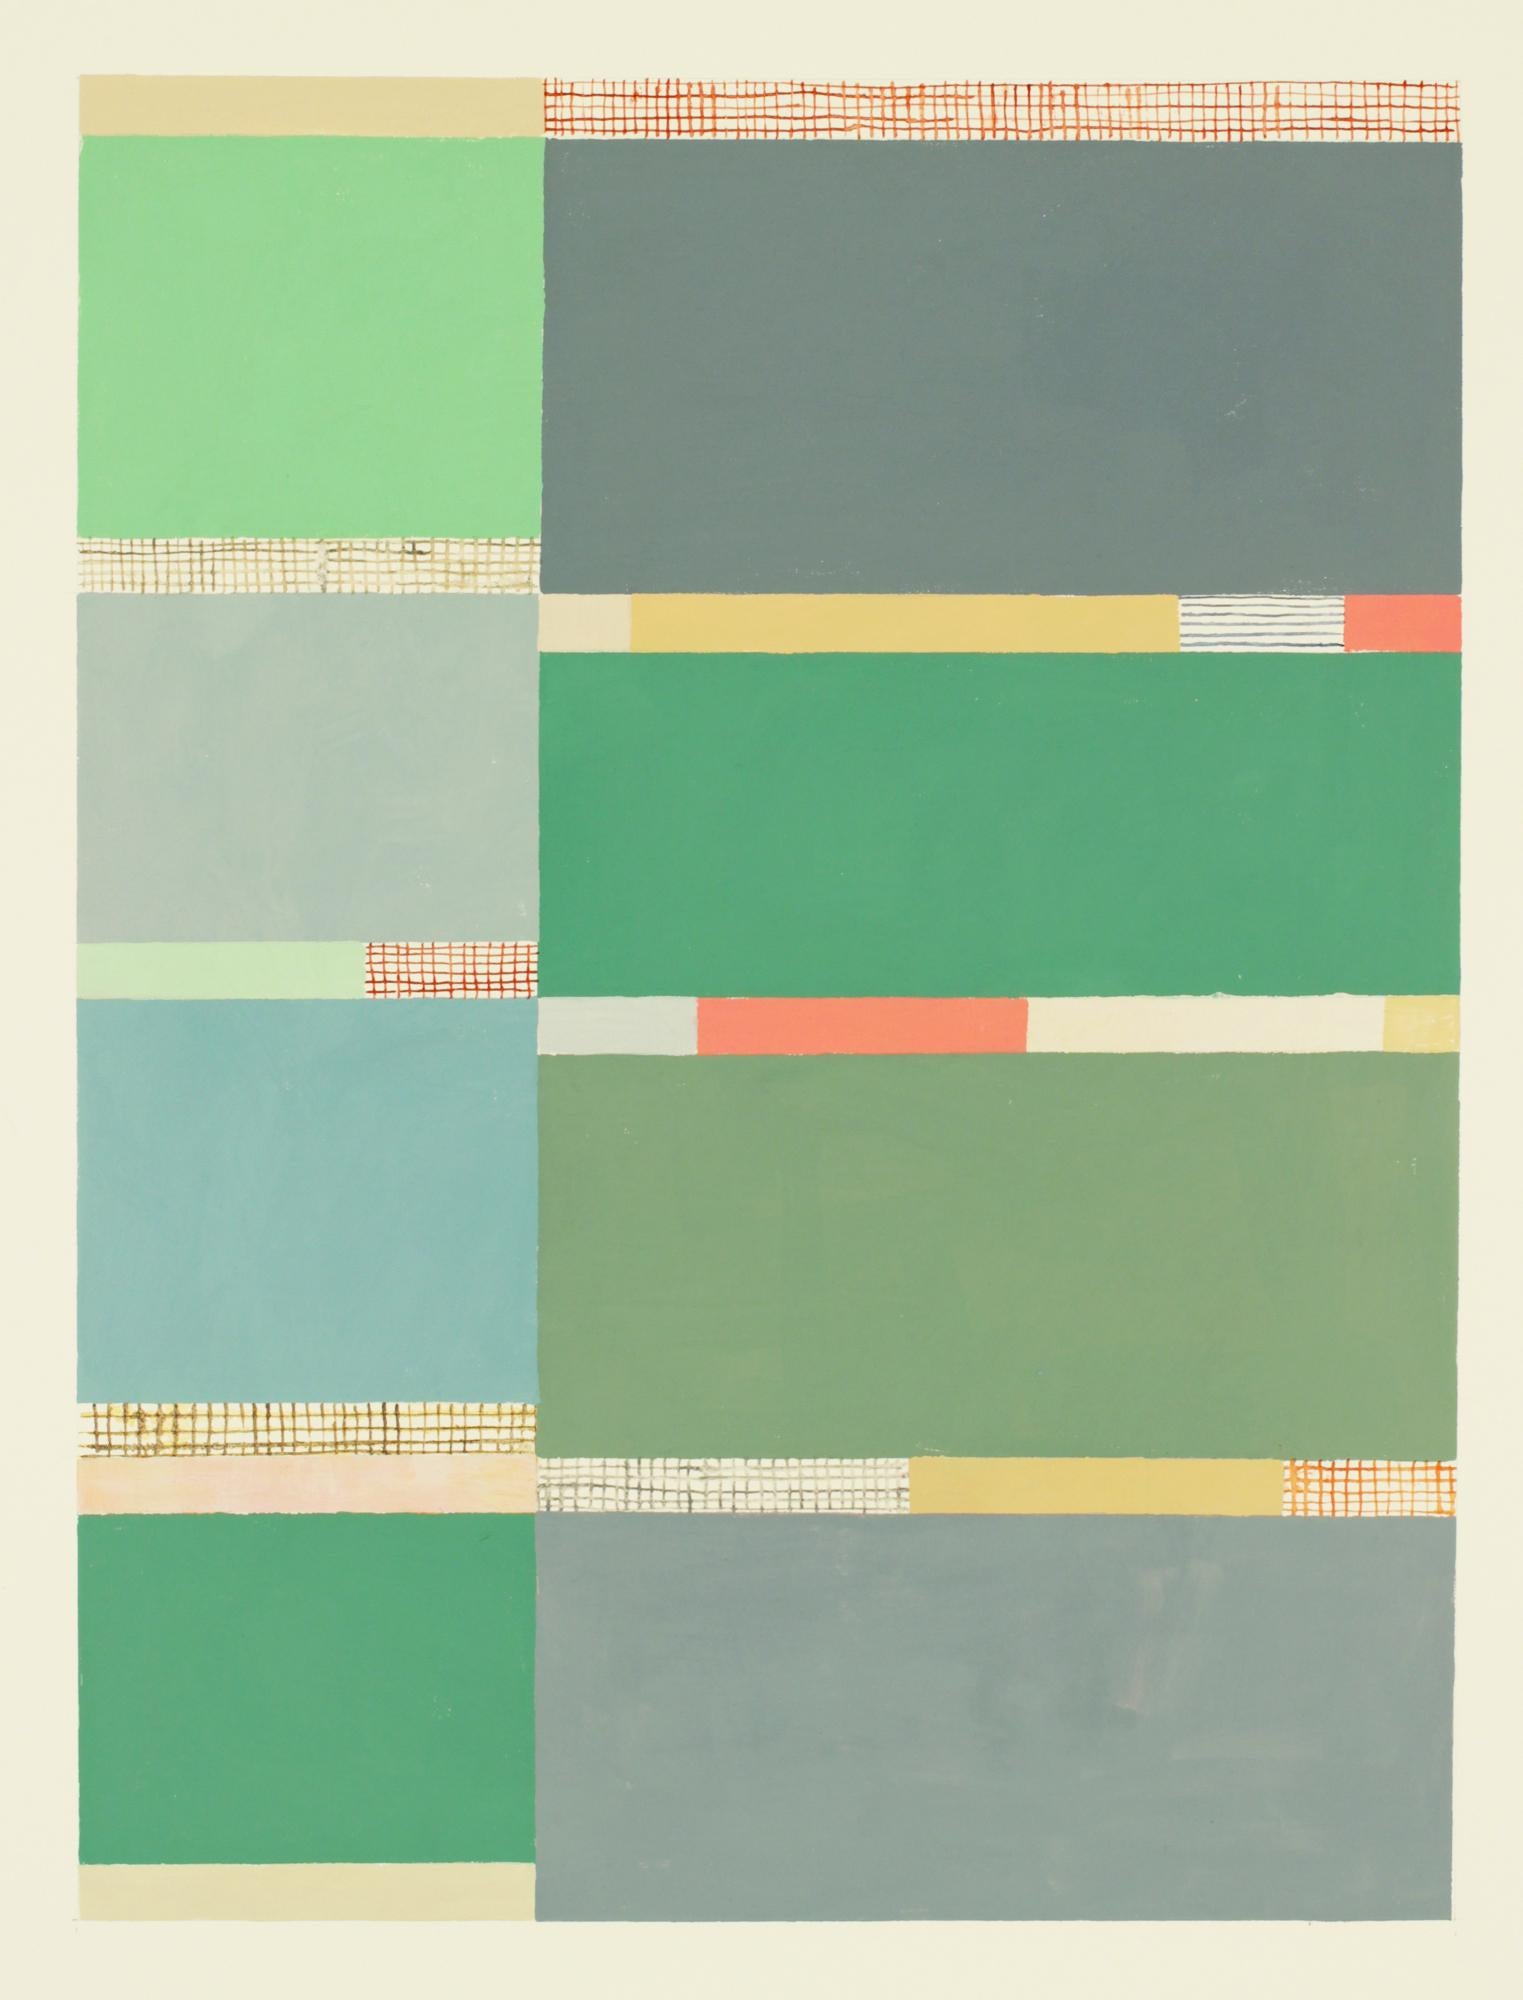 In this abstract painting in gouache, ink, and graphite on paper by Elizabeth Gourlay, clean and precise, carefully ordered blocks of color in shades of green, gray, golden yellow ochre, sage, light gray teal and dark coral are bright against the